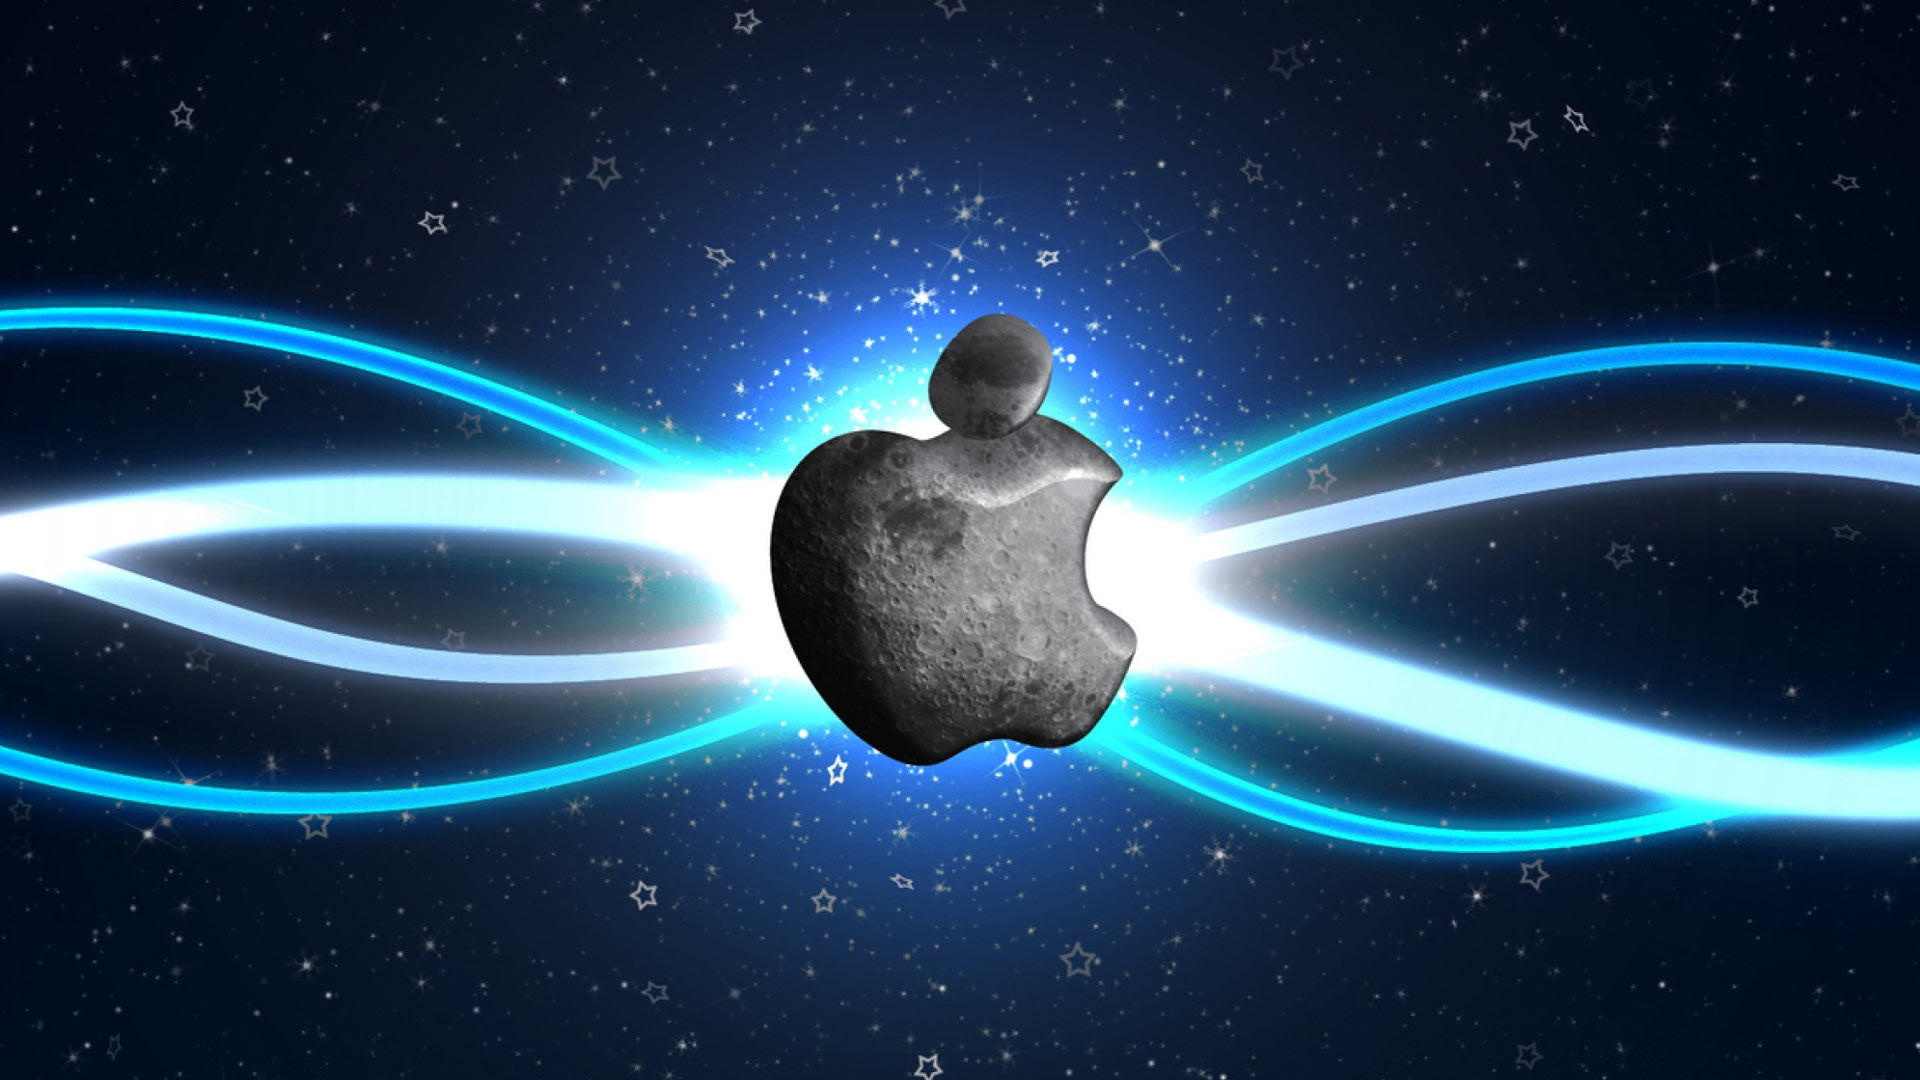 1920x1080 Cool apple logo wallpaper – Free full hd wallpapers for .